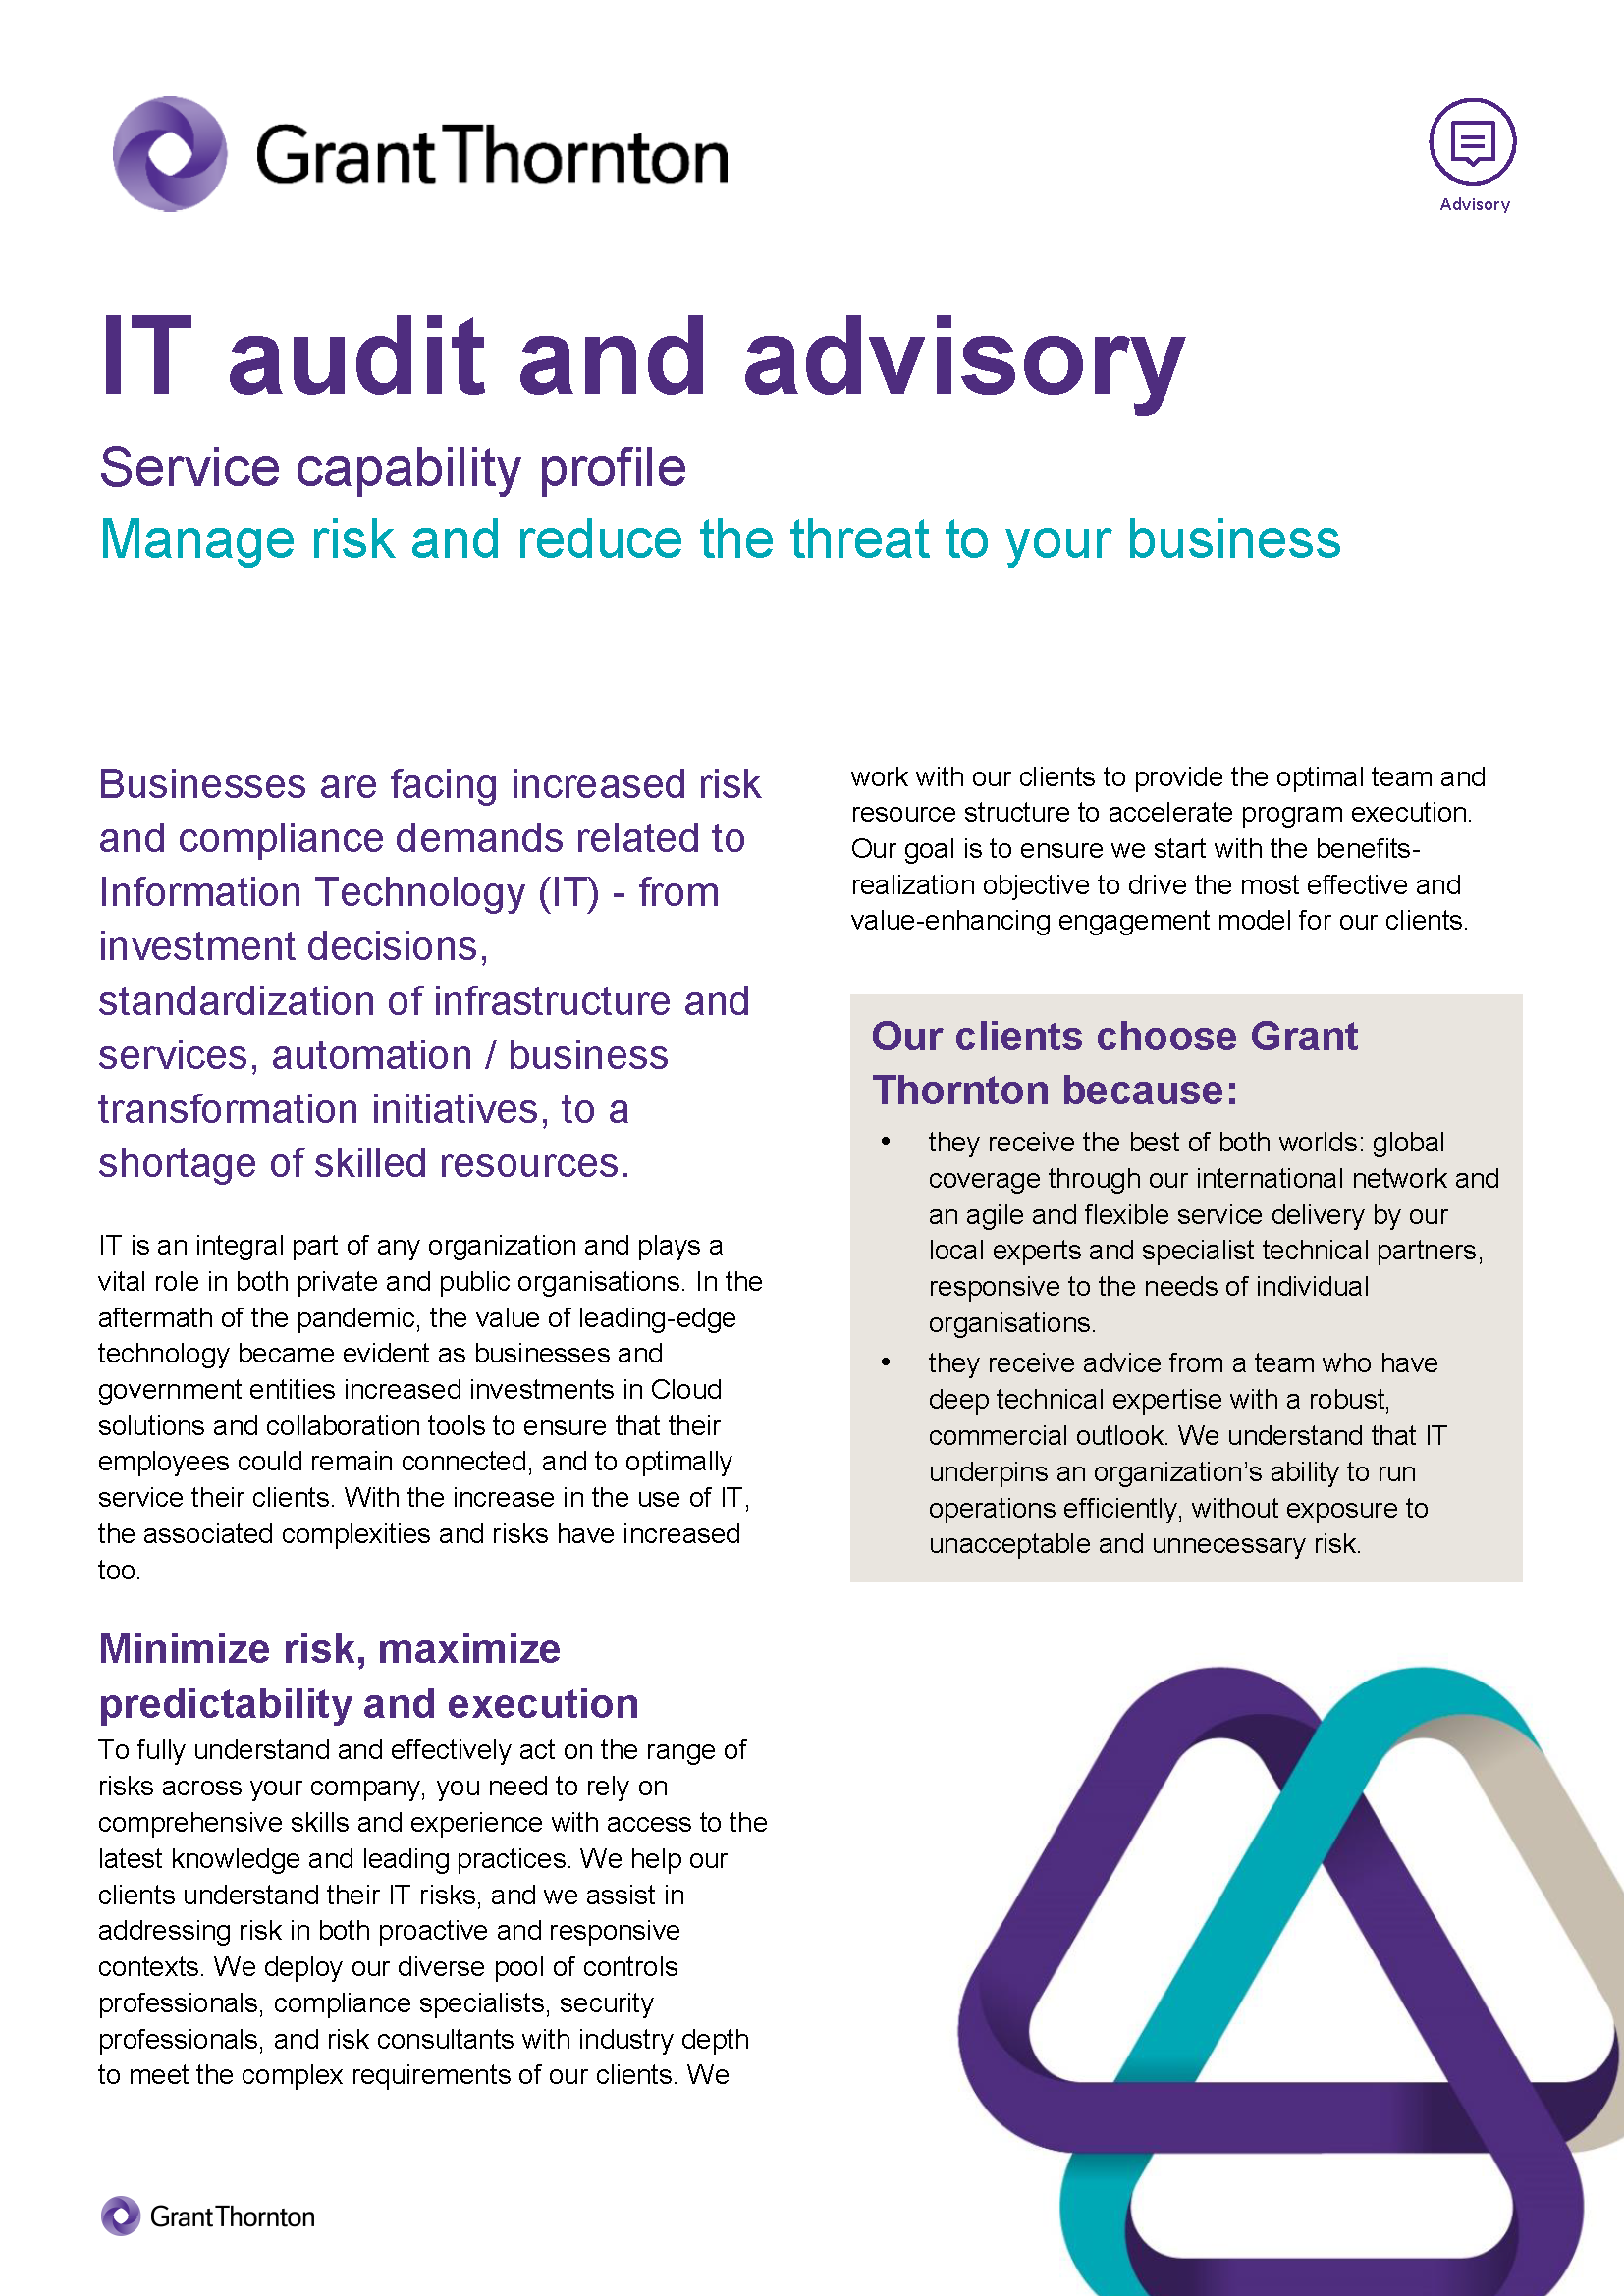 IT audit and advisory services Grant Thornton